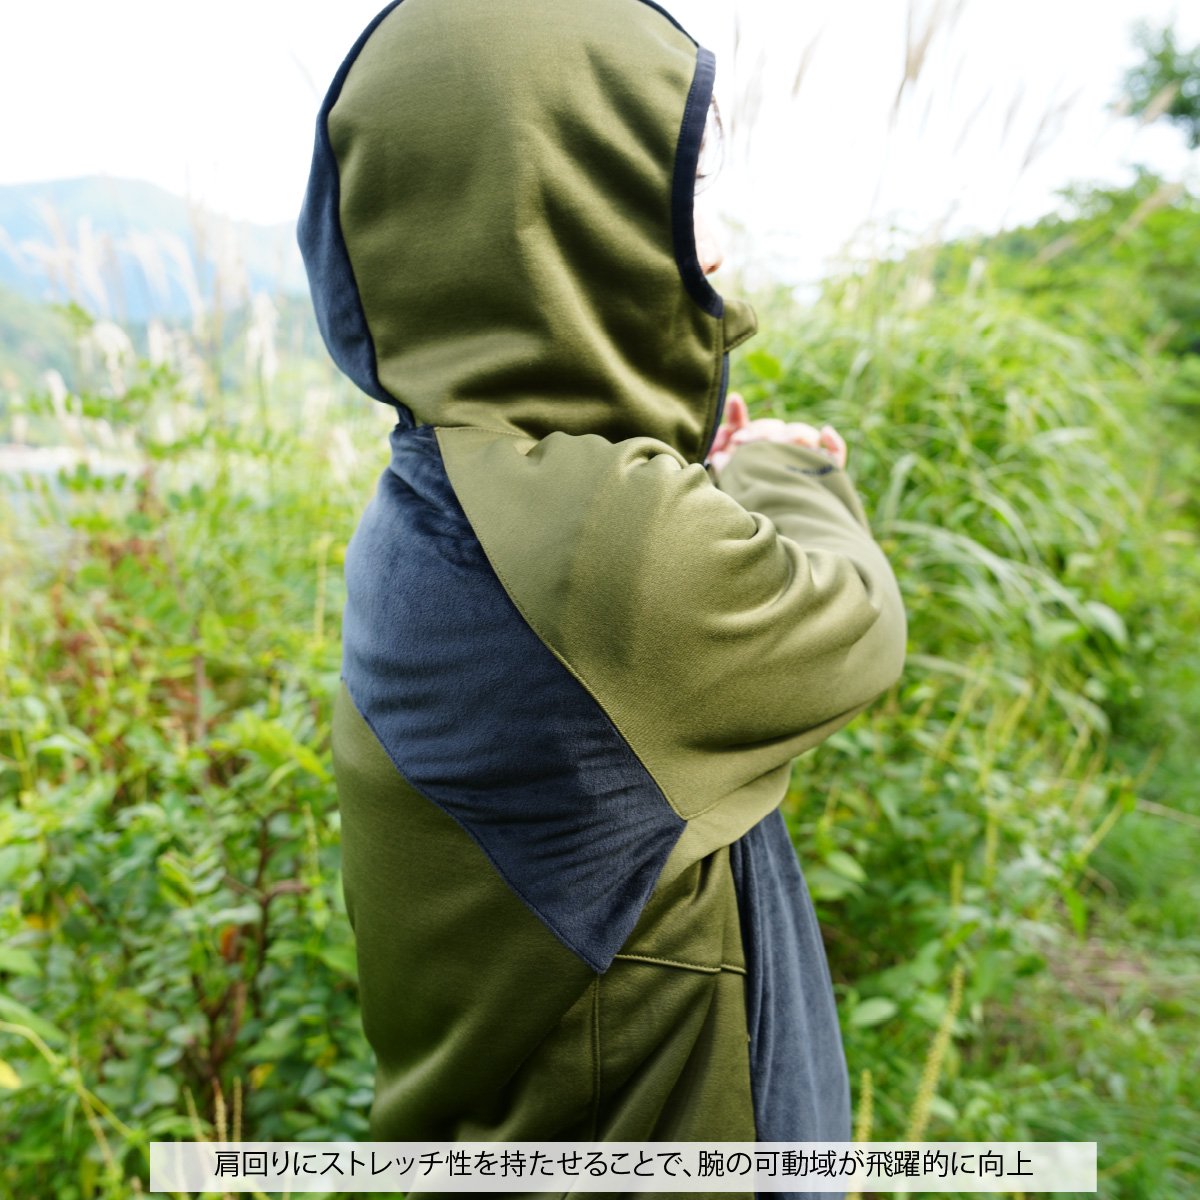 <img class='new_mark_img1' src='https://img.shop-pro.jp/img/new/icons47.gif' style='border:none;display:inline;margin:0px;padding:0px;width:auto;' />EZ zip hoodie